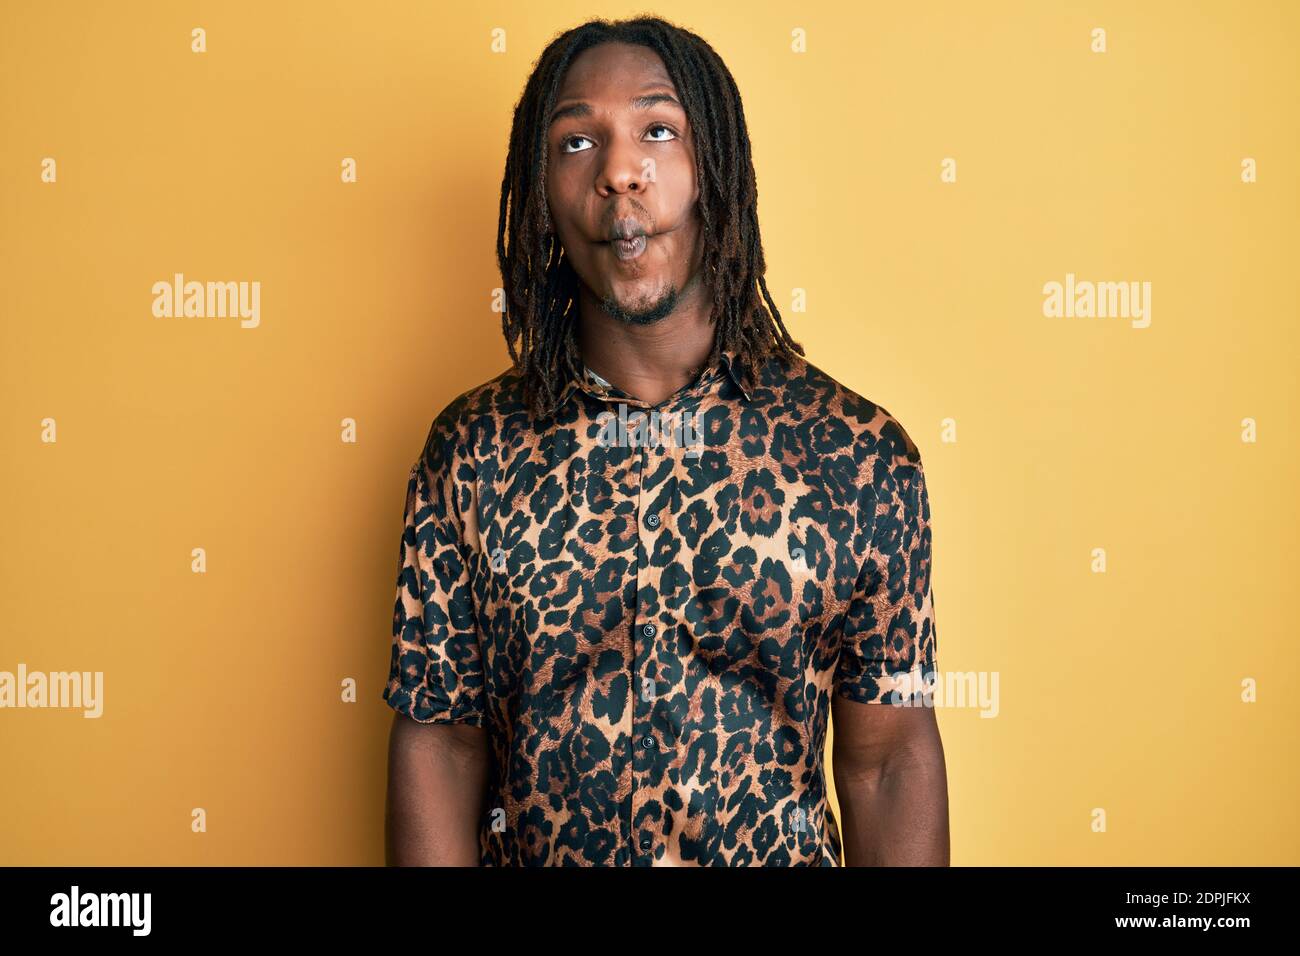 African american man with braids wearing leopard animal print shirt making fish face with lips, crazy and comical gesture. funny expression. Stock Photo